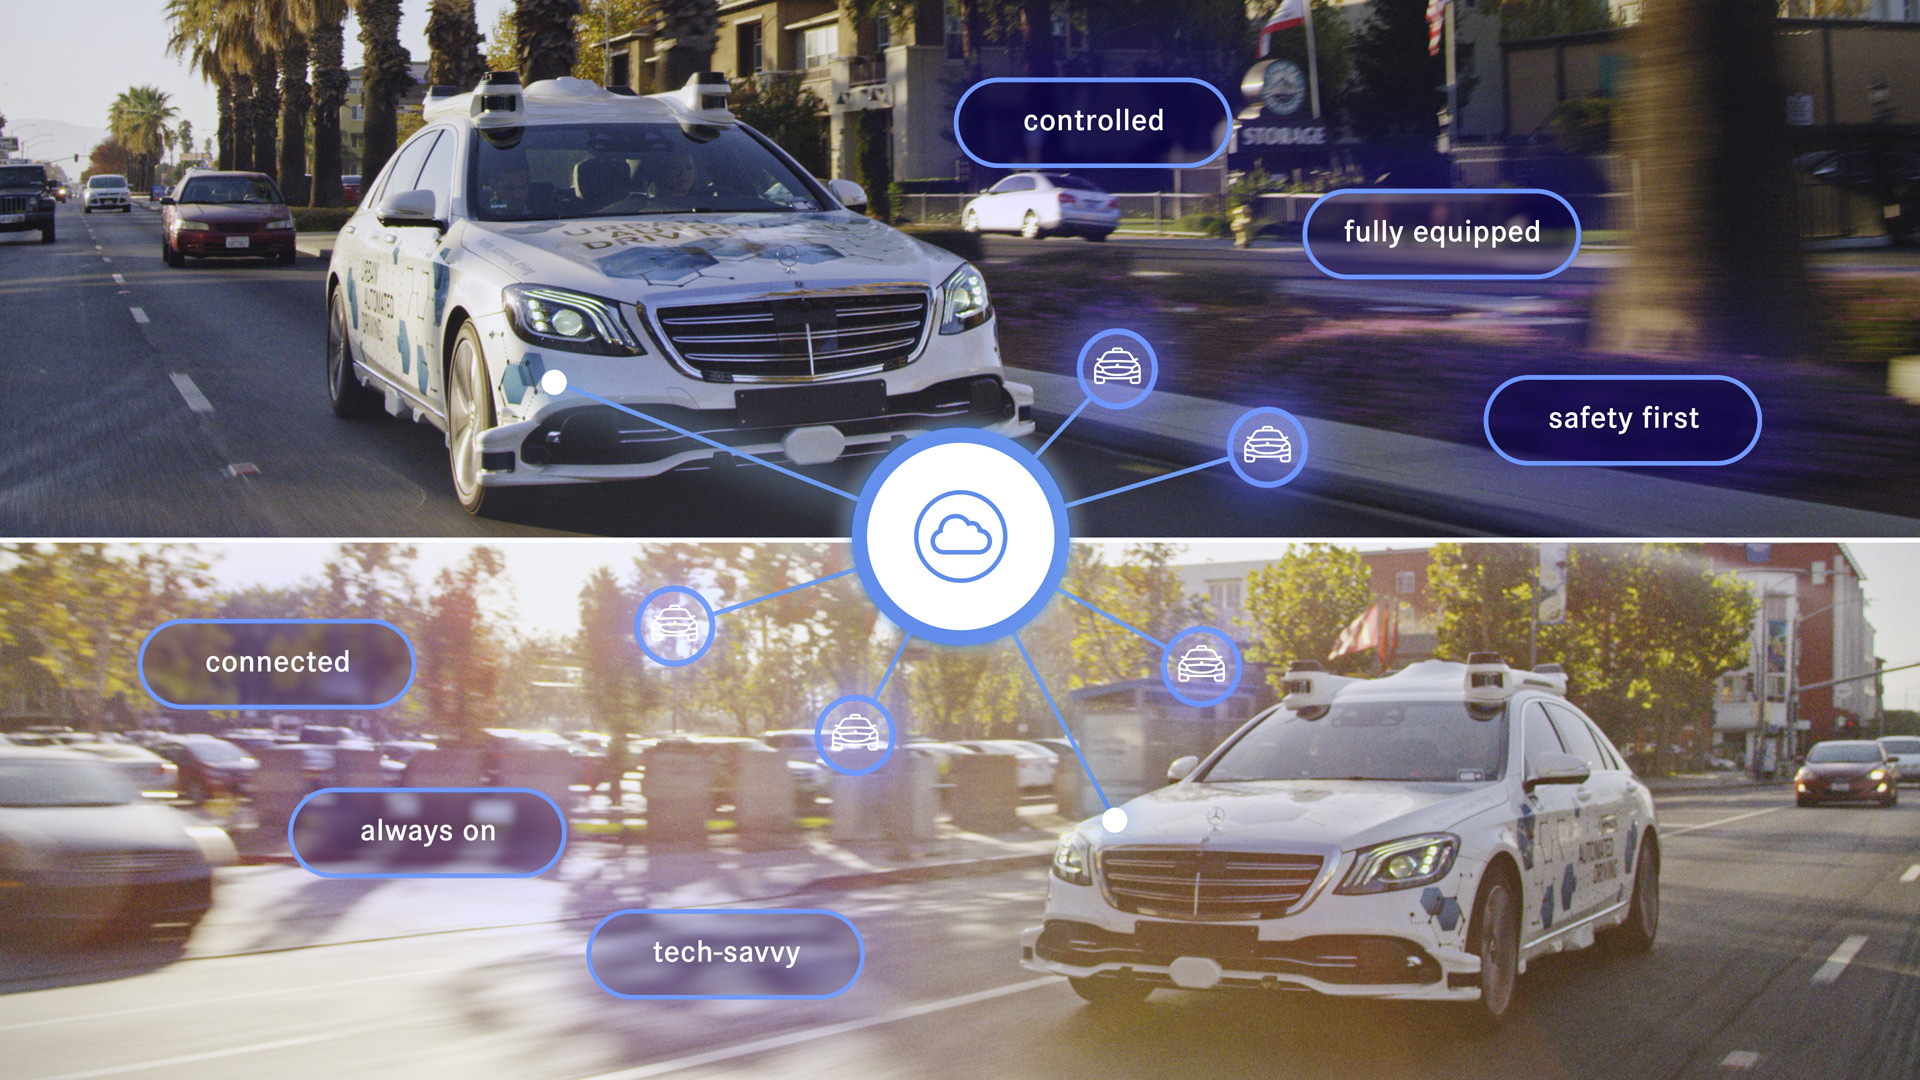 Daimler and Bosch self-driving car prototype in Silicon Valley